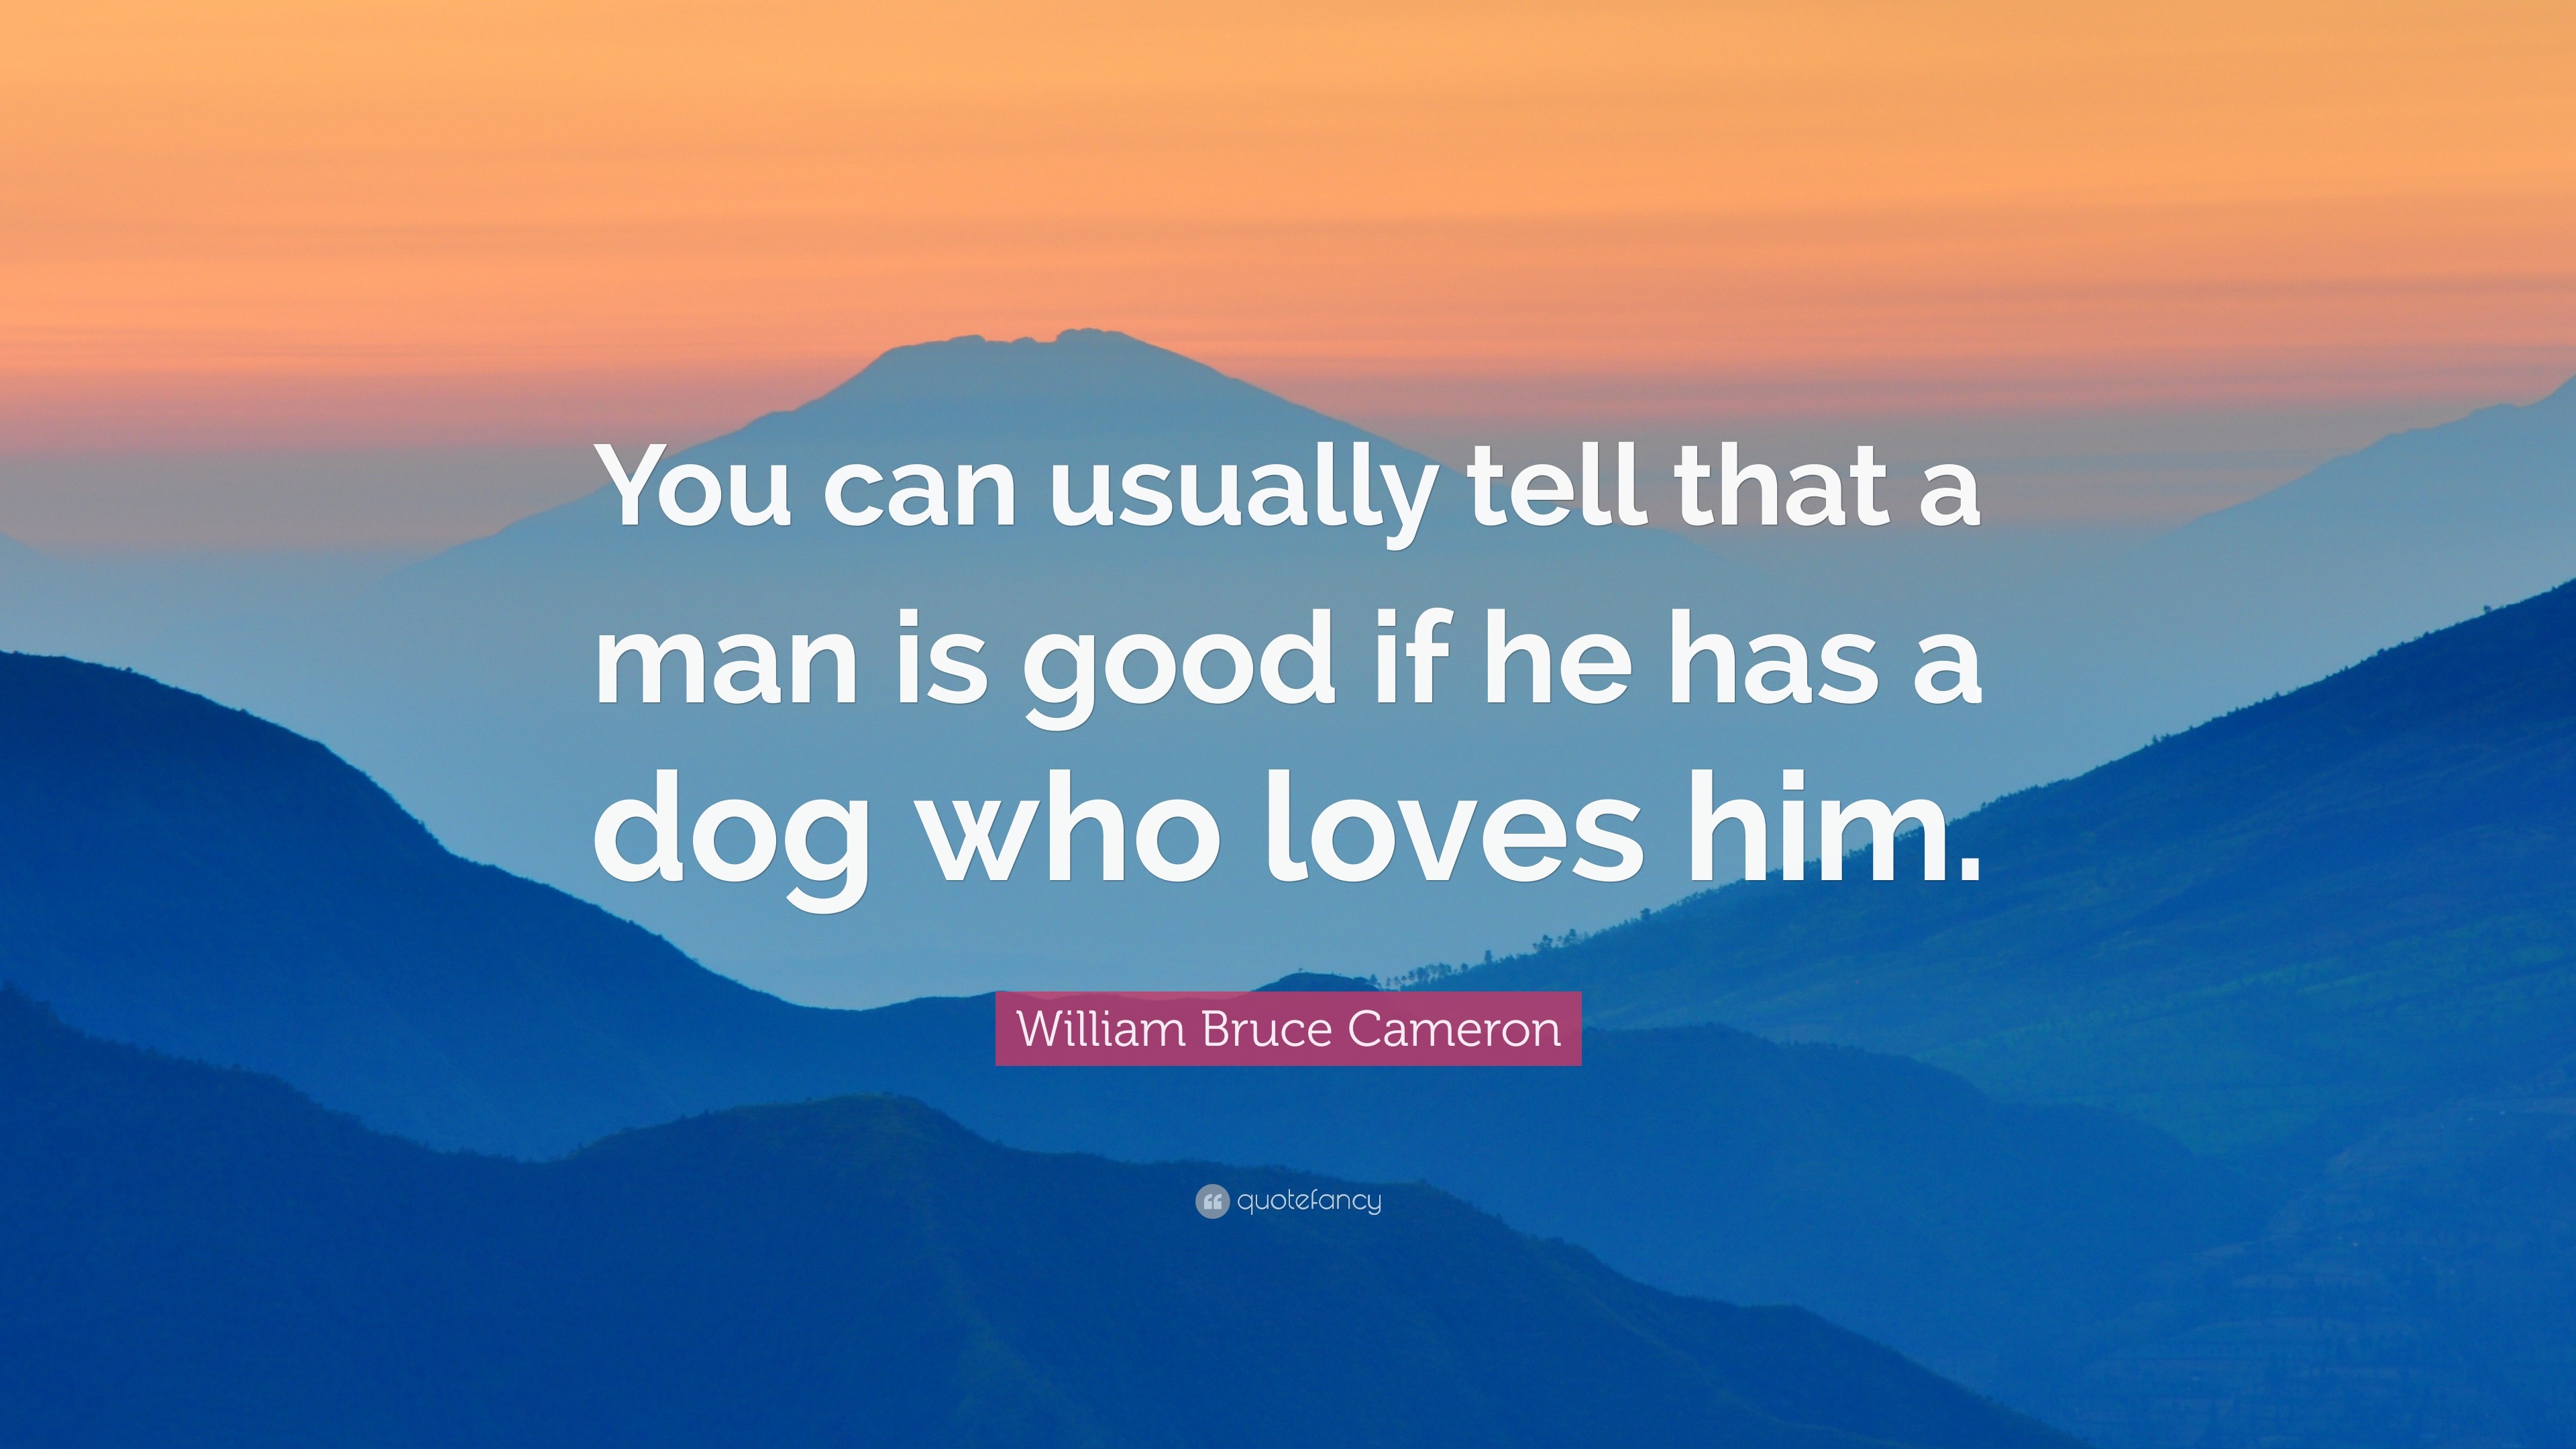 William Bruce Cameron Quote: “You can usually tell that a man is good ...